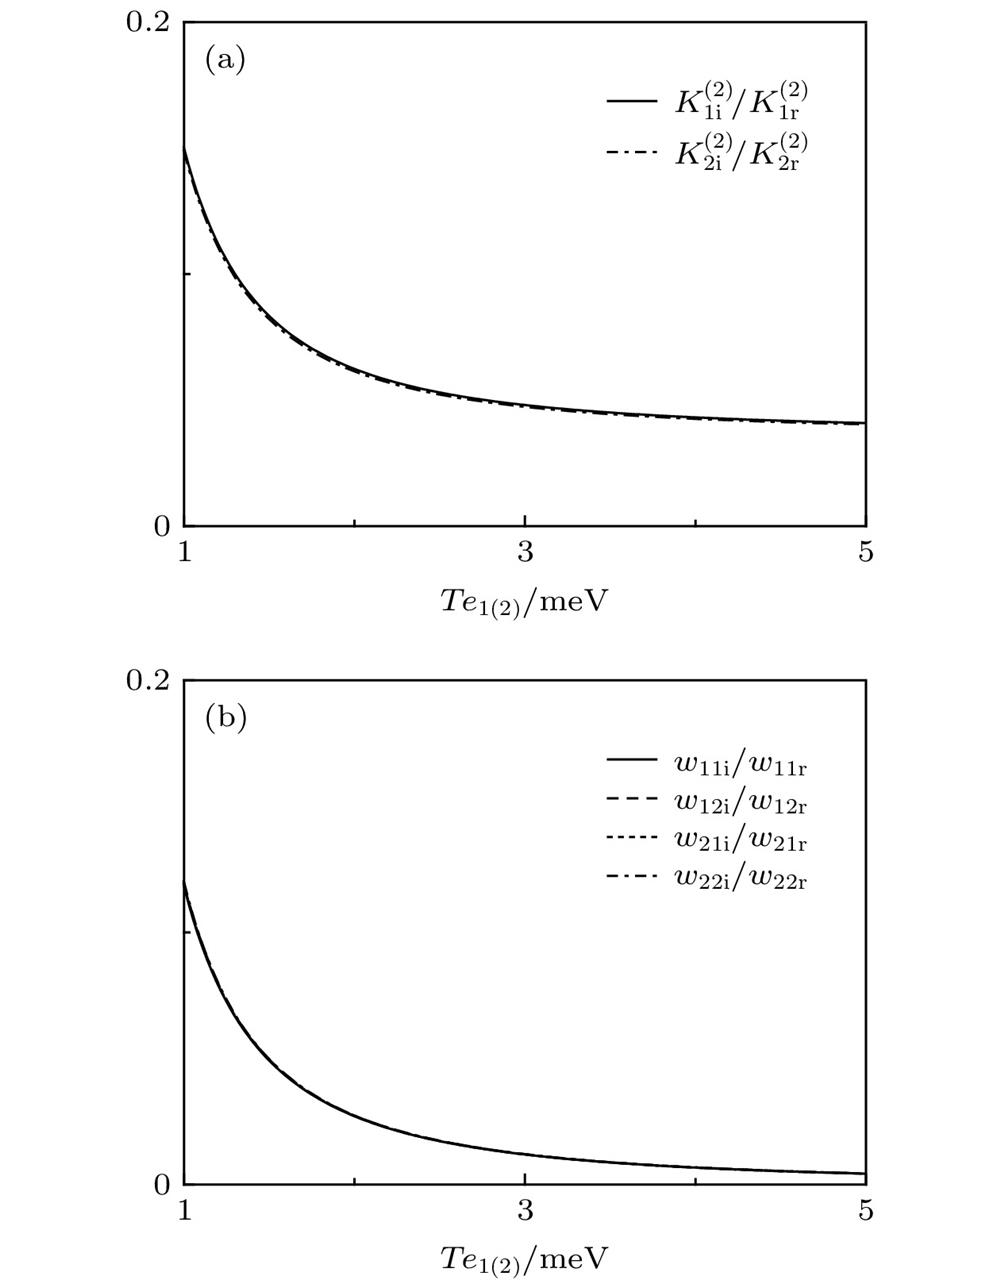 The ratio of the imaginary part to the real part of (a) dispersion coefficient and (b) nonlinear coefficient as a function of tunneling strength of the quantum inter-dot. The parameters used are given in the text.